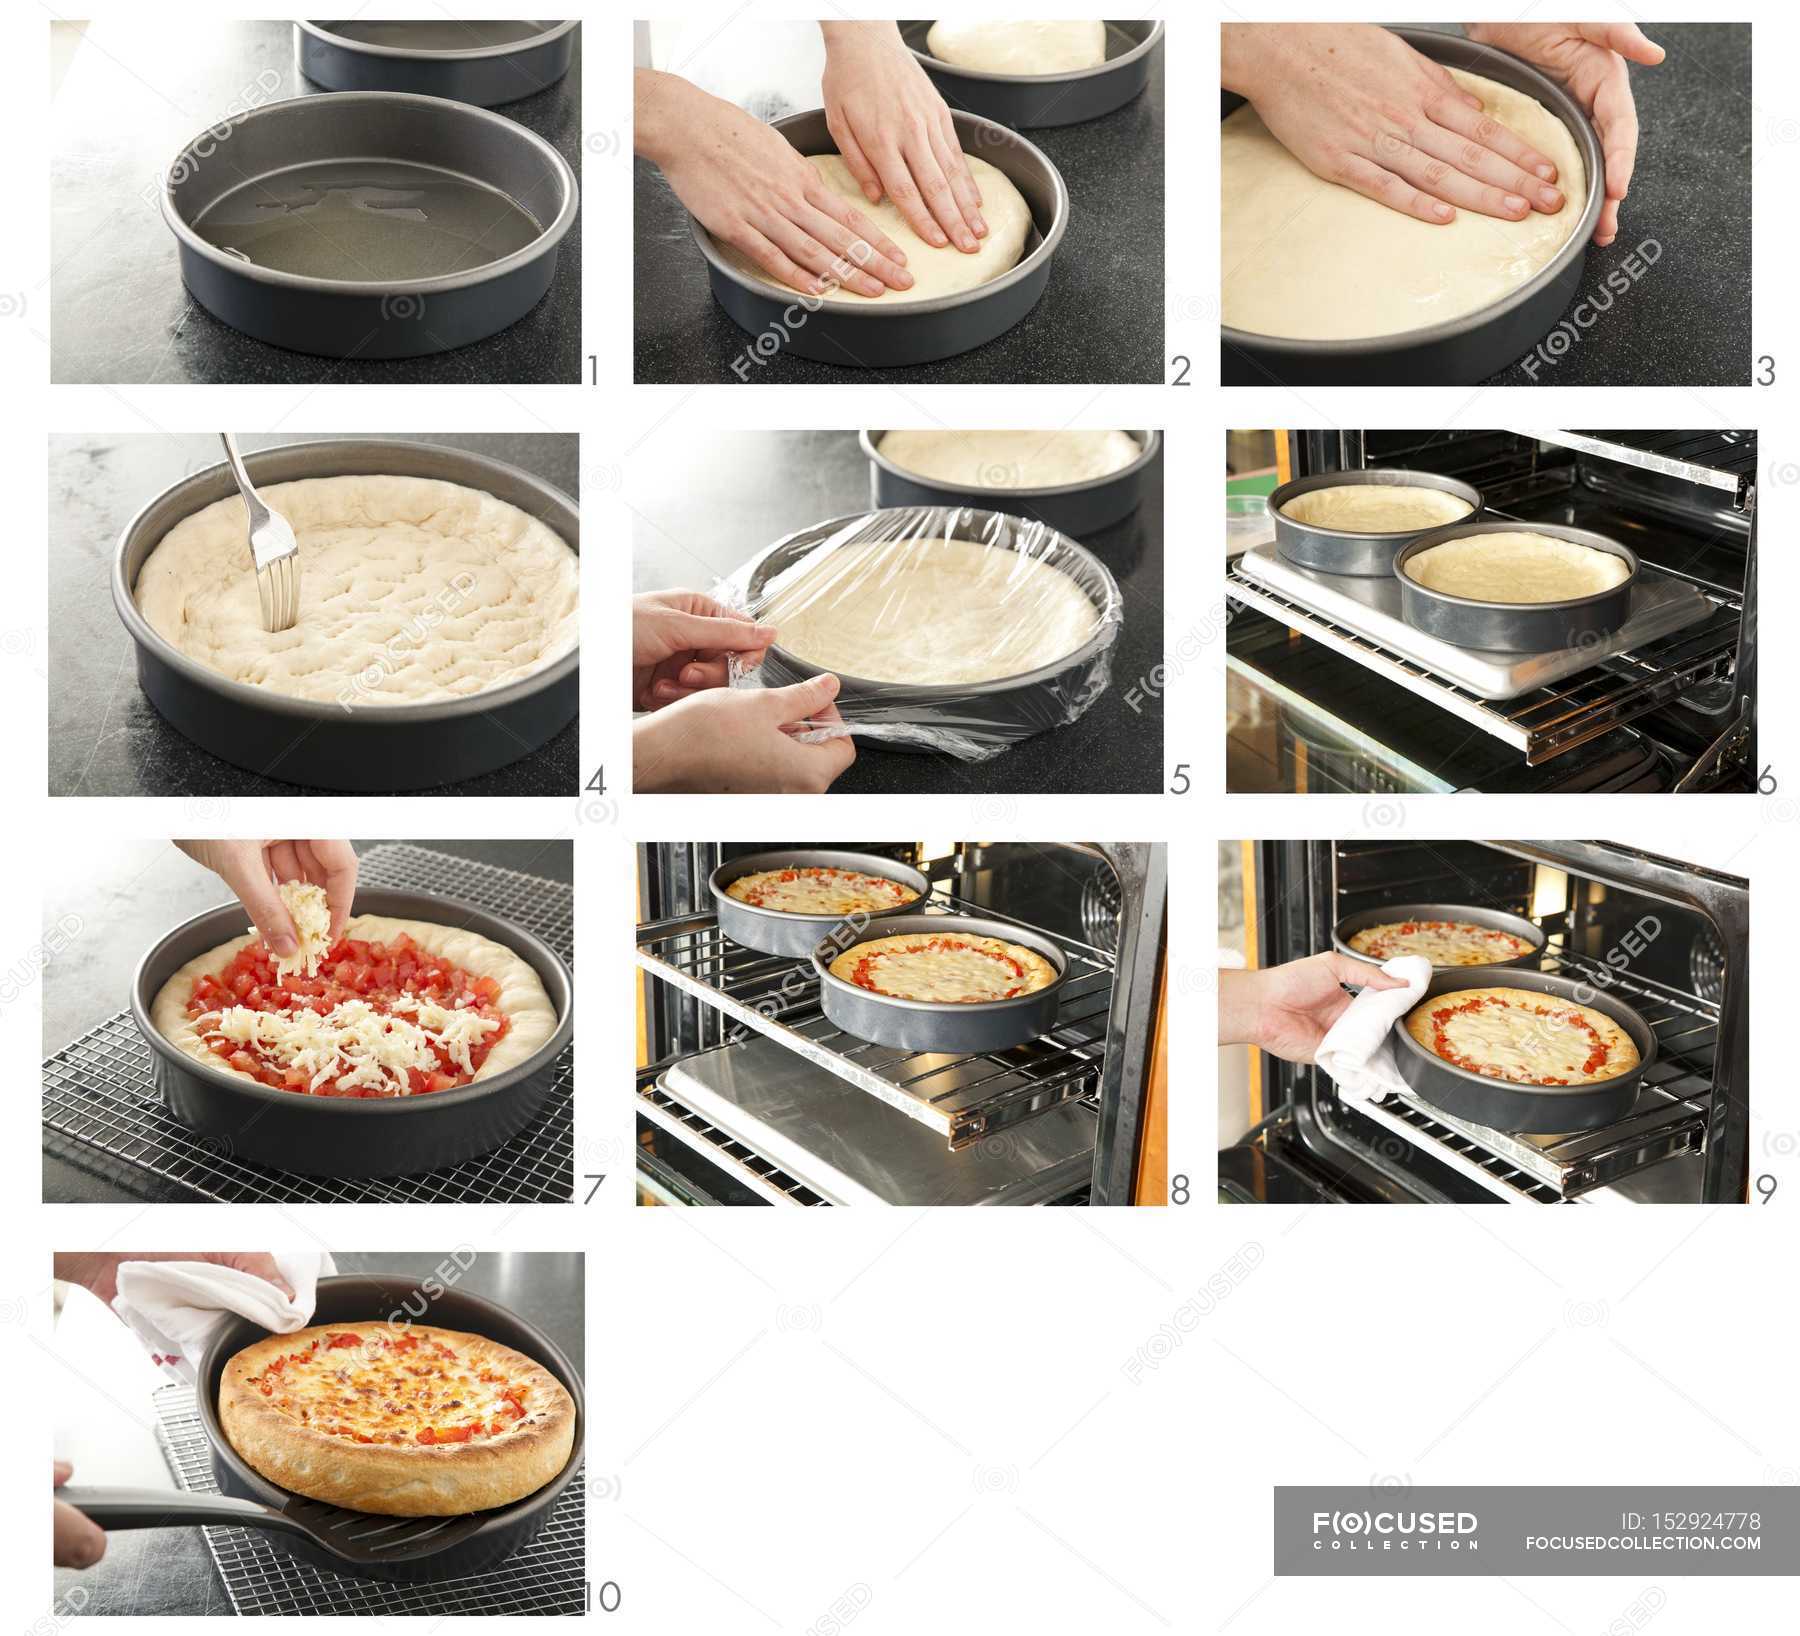 process essay how to make pizza